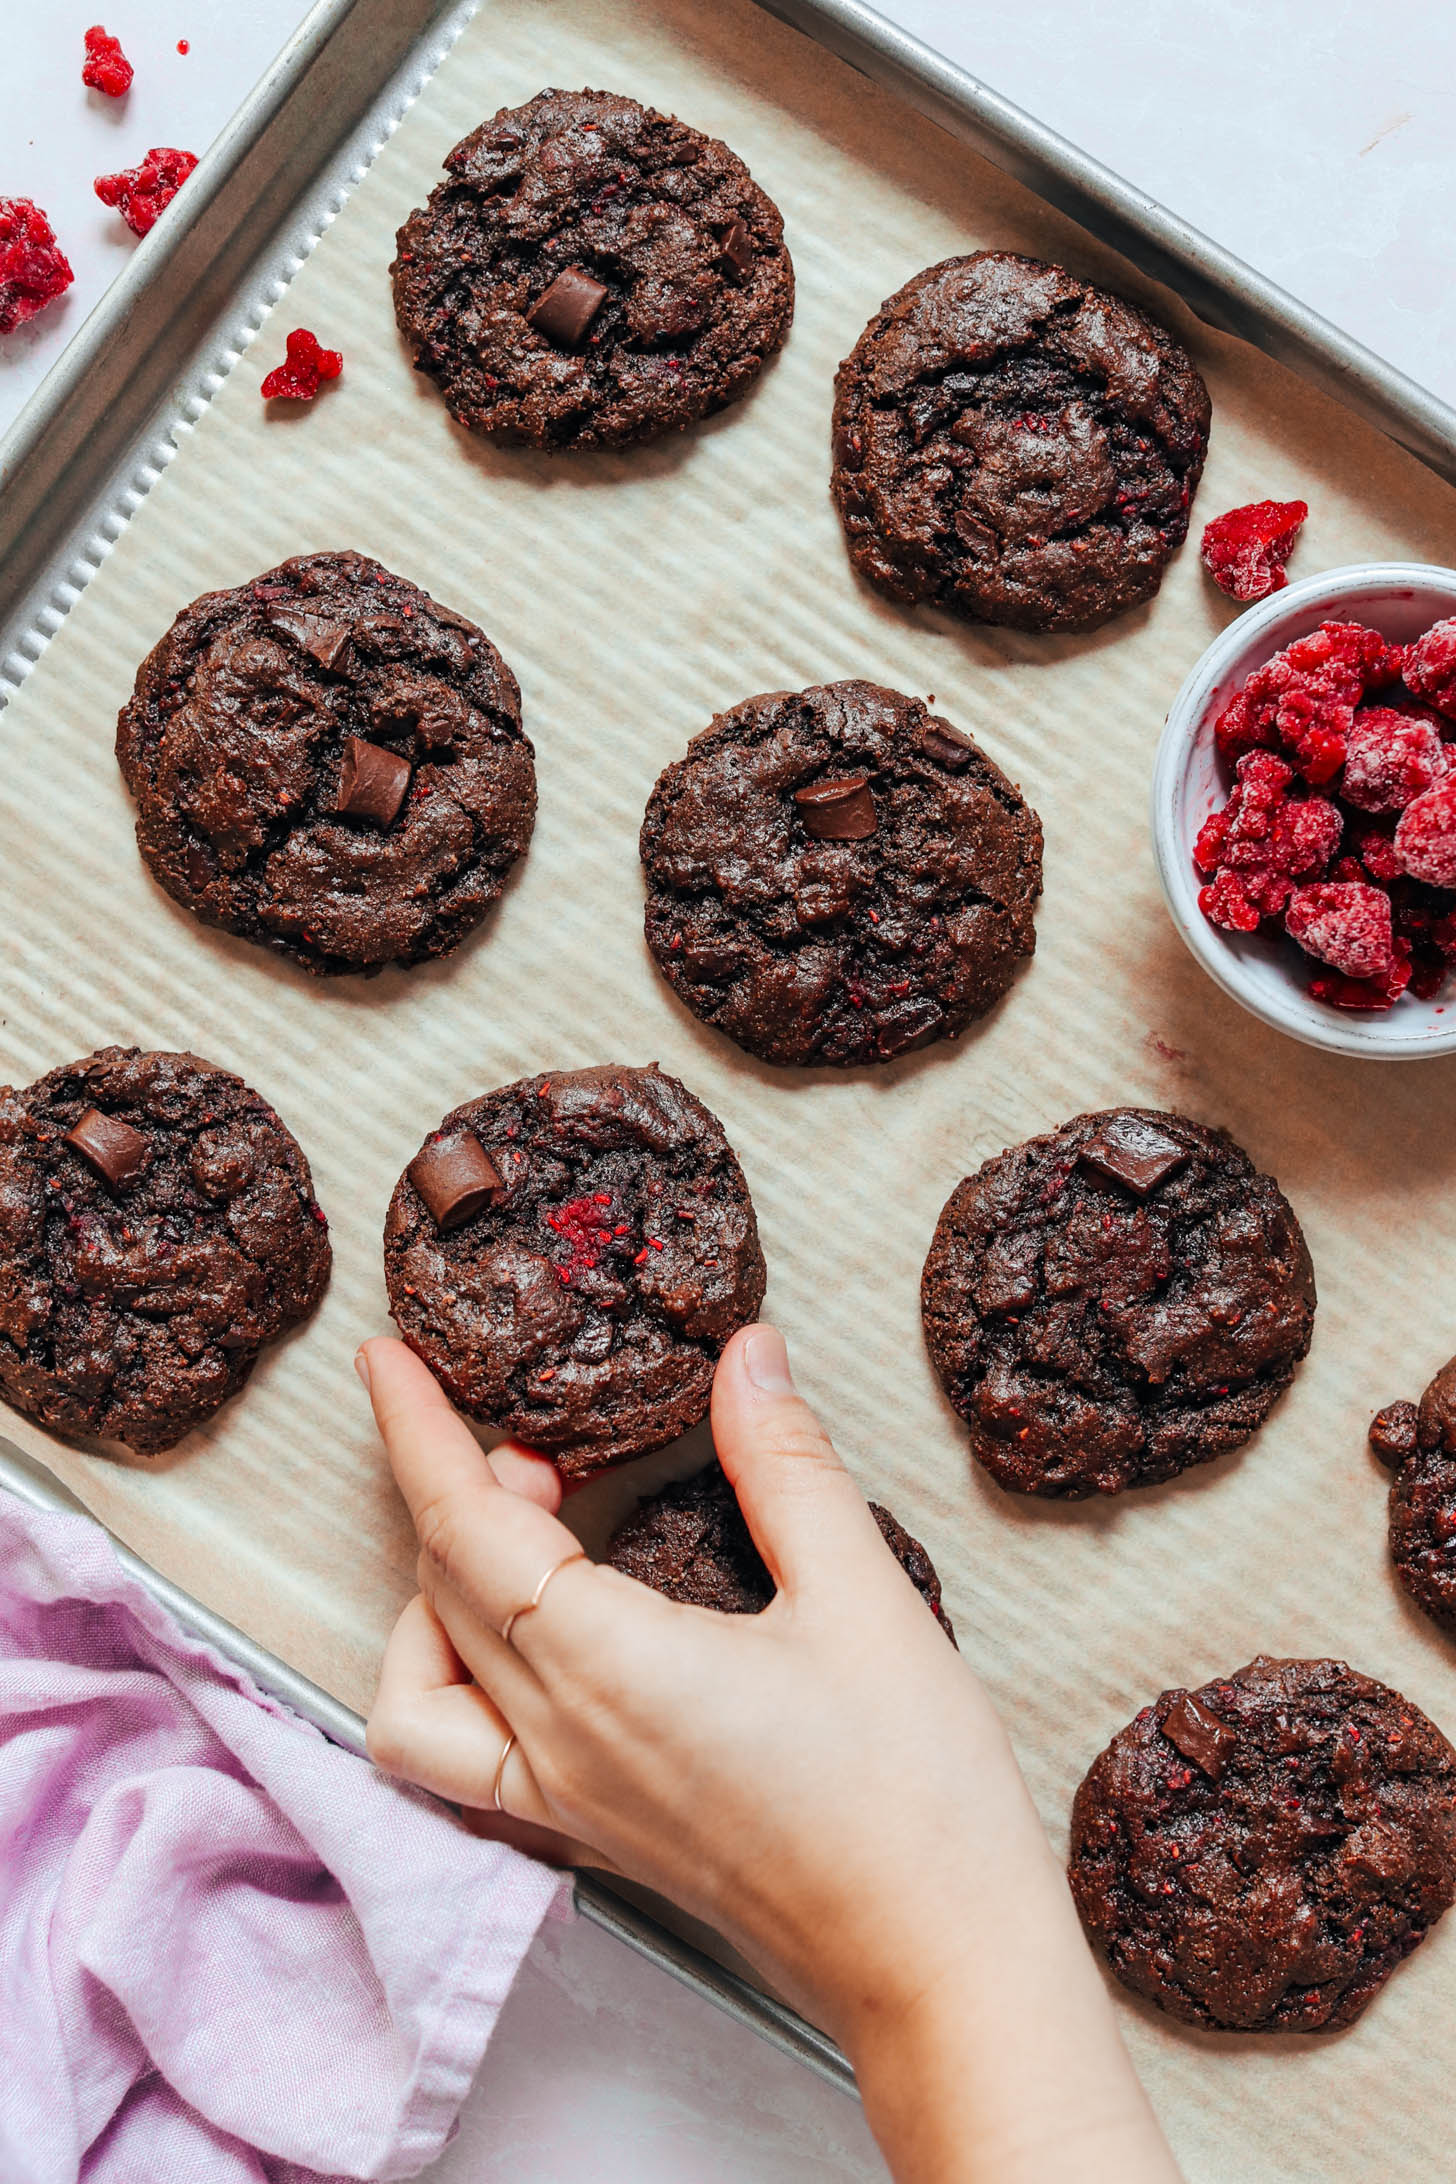 Picking up a gluten-free chocolate raspberry cookie from a baking sheet